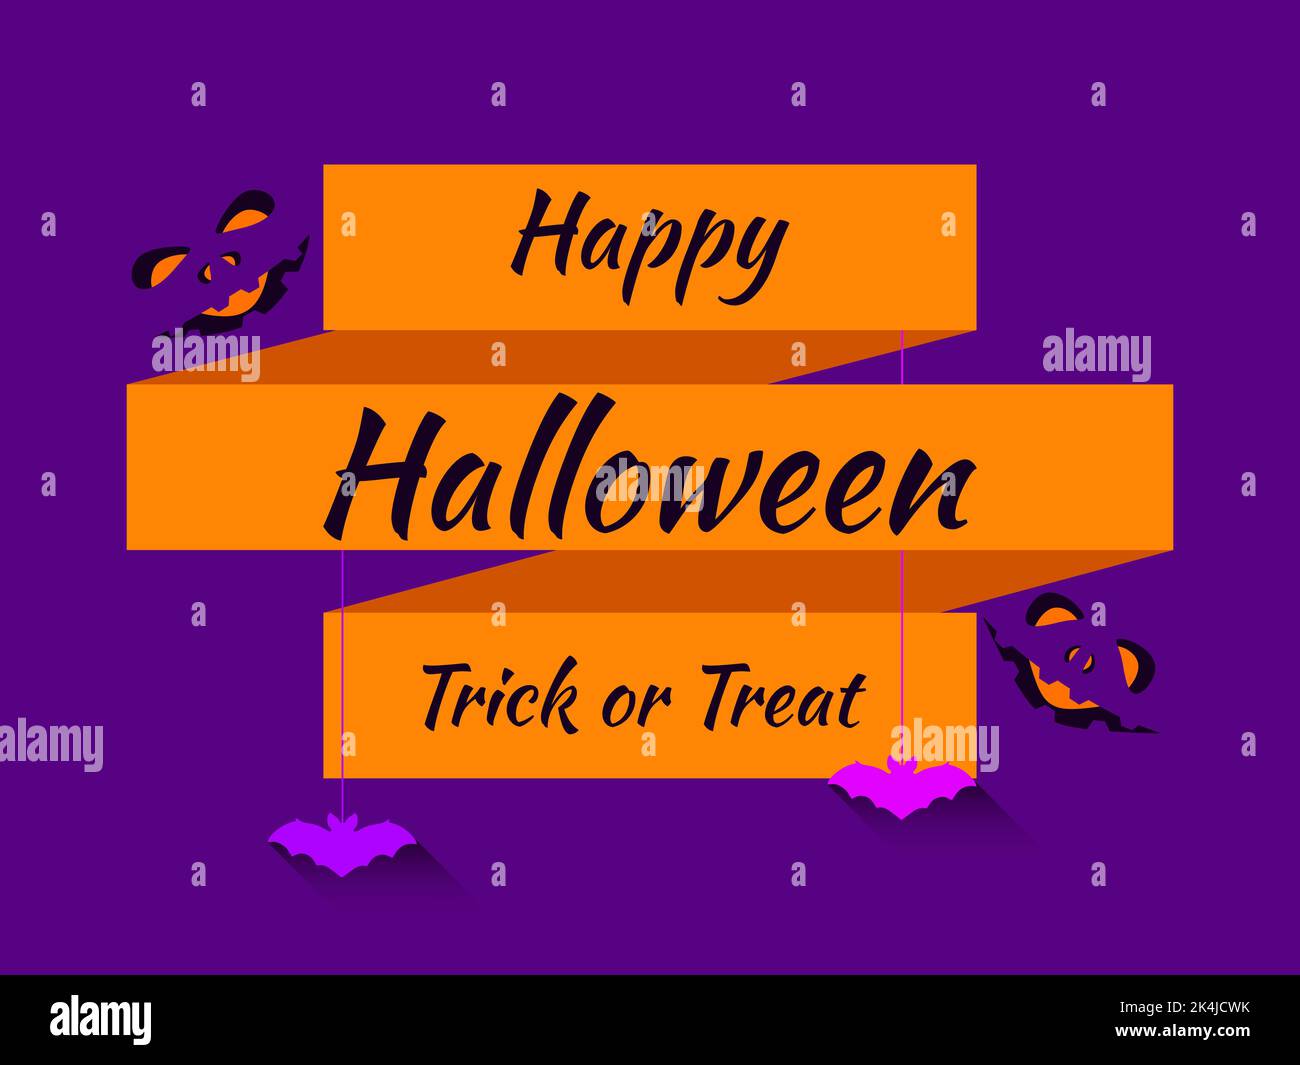 Happy Halloween October 31st, trick or treat. Festive banner with ...